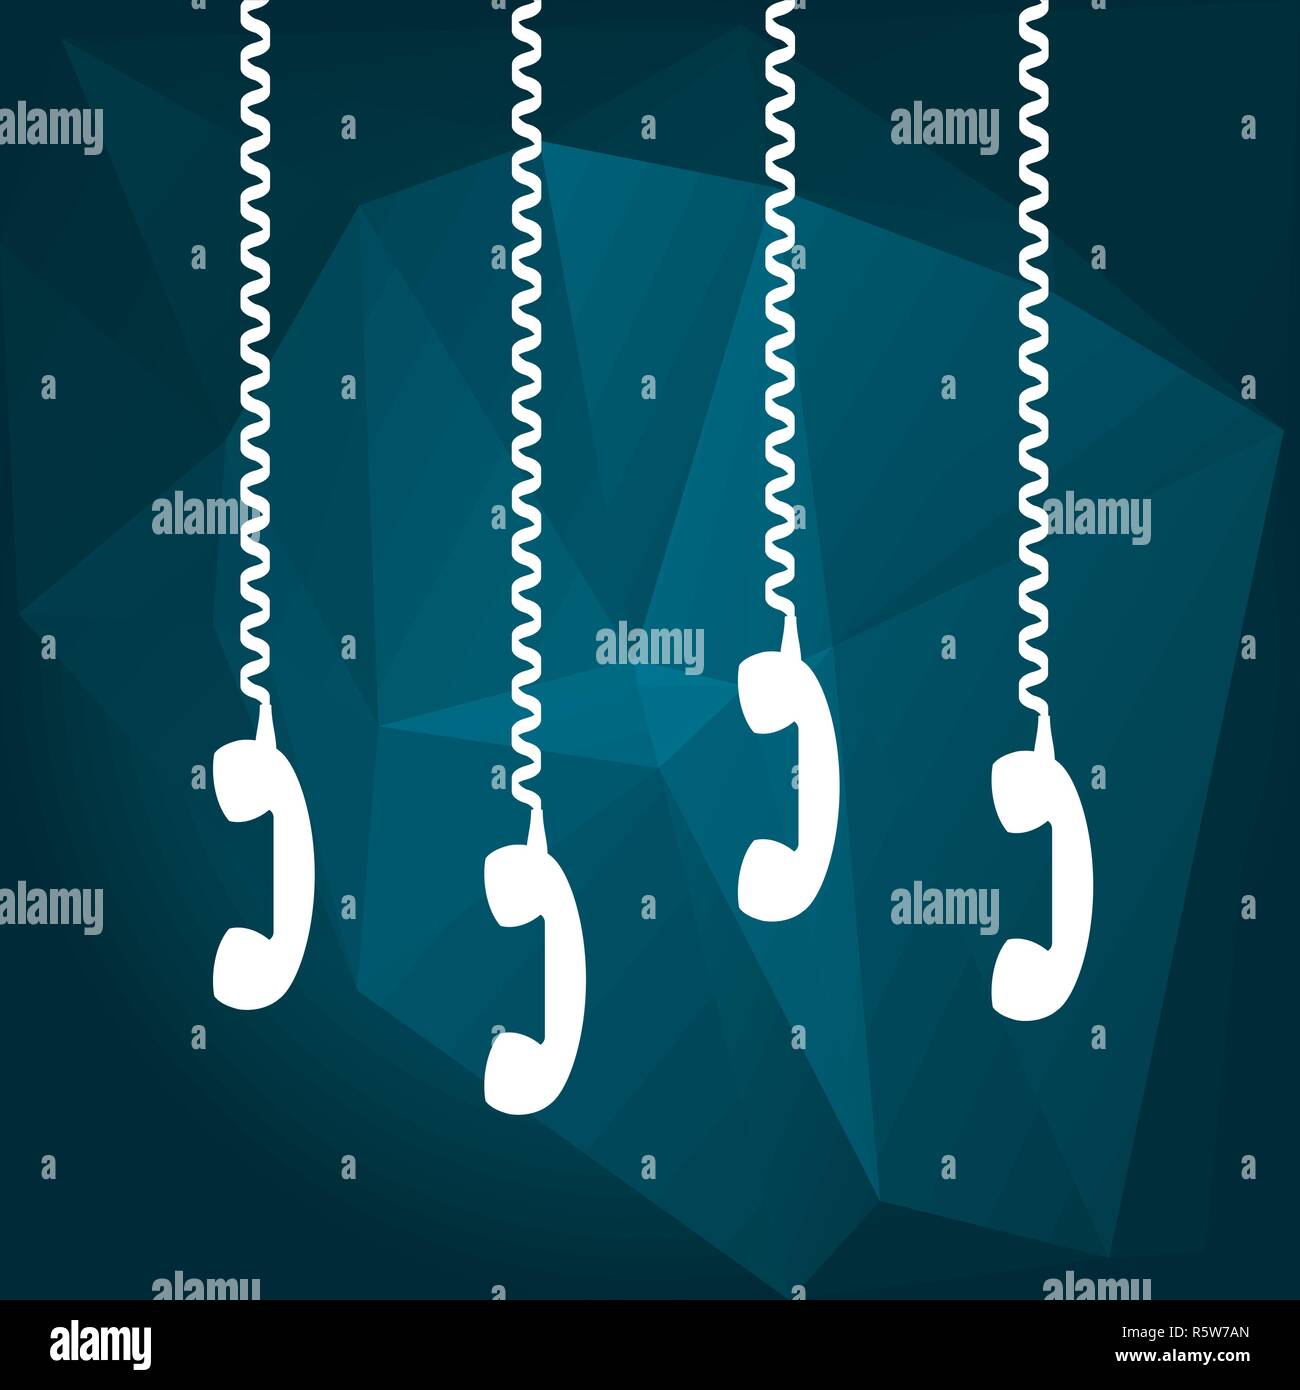 White retro phone receivers hanging on cables. Blue low poly background. On hold, on the phone, contact us, concept. Vector illustration, flat style. Stock Vector